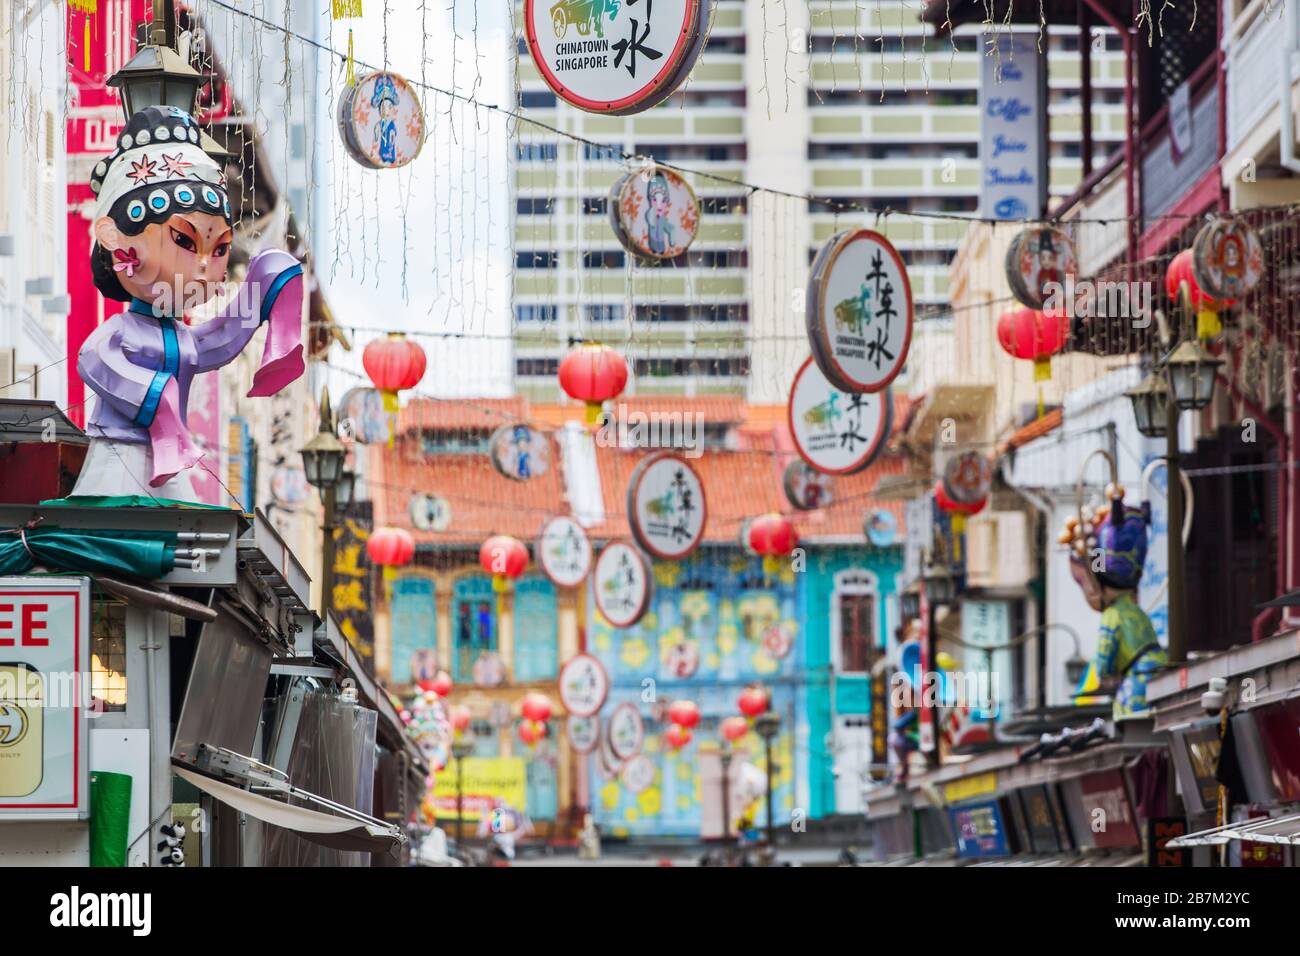 Street scene of a Chinese opera decoration at the street of Chinatown for visitors to marvel at the art, Singapore. Stock Photo